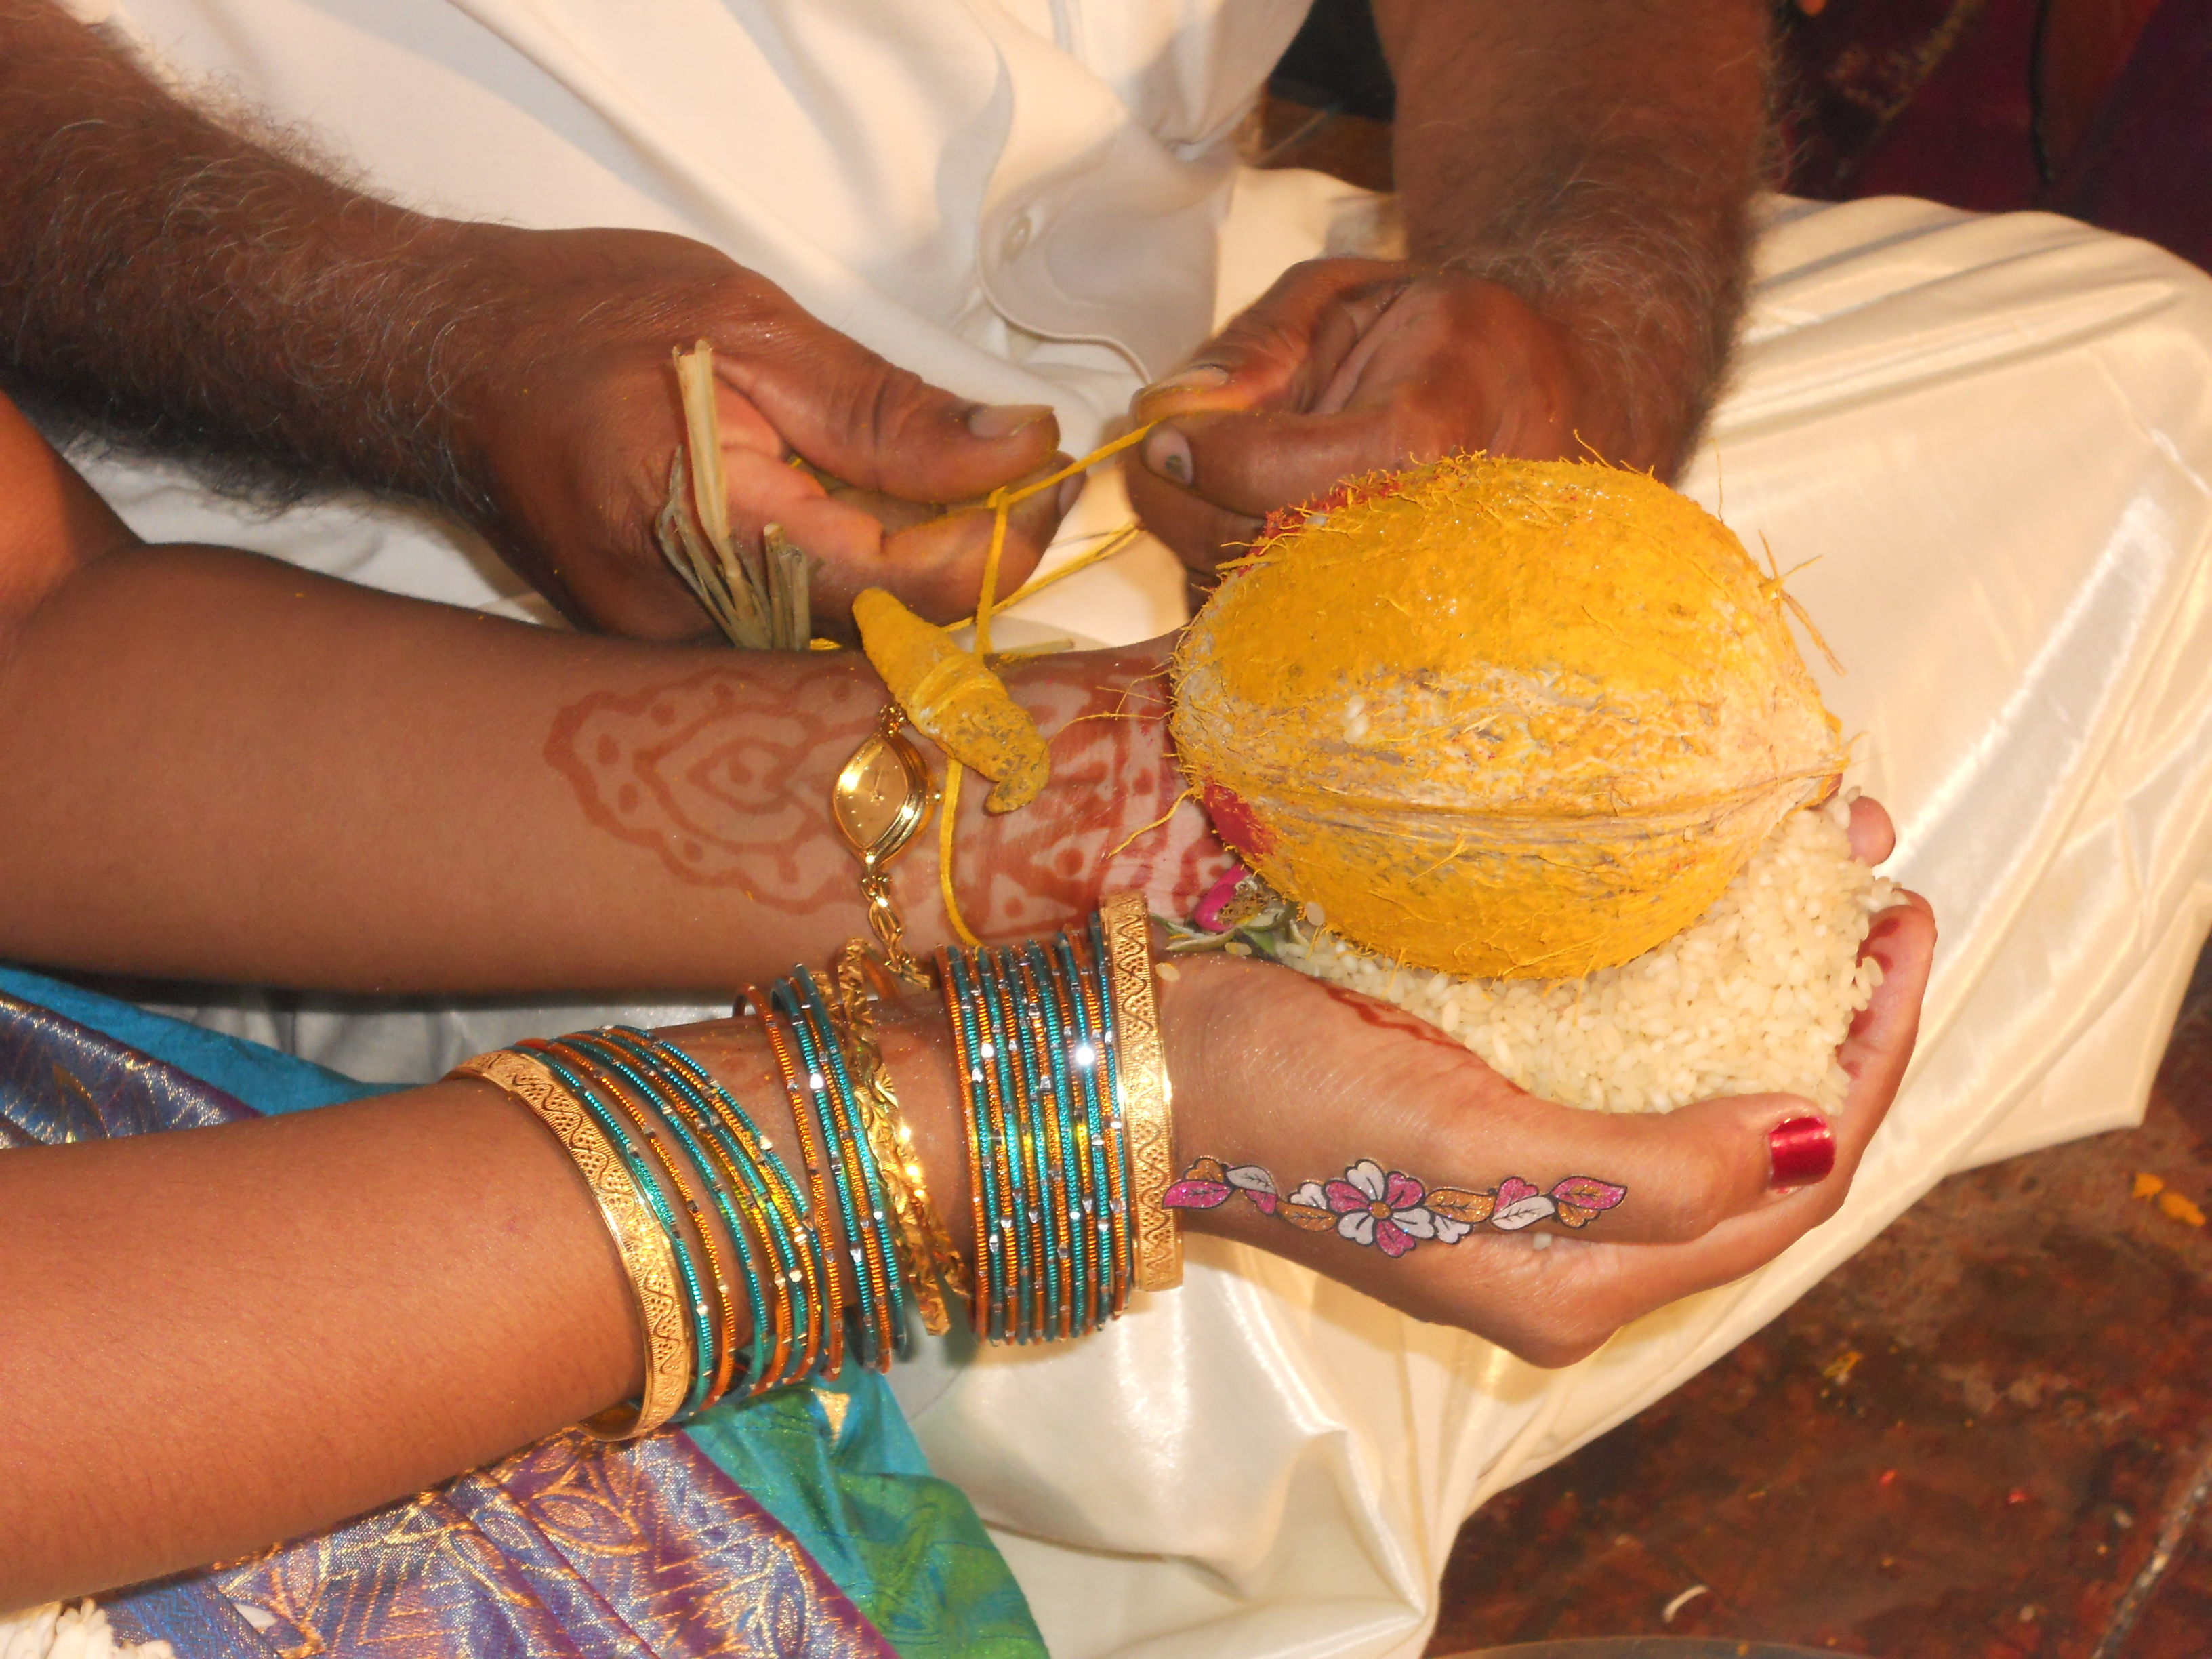 File:TAMIL MARRIAGE CEREMONY.JPG - Wikimedia Commons